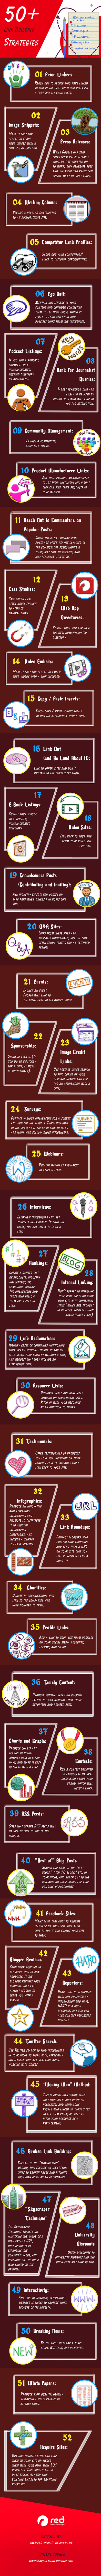 How to Get Backlinks: 52 Ways to Build Links & Improve Your SEO!